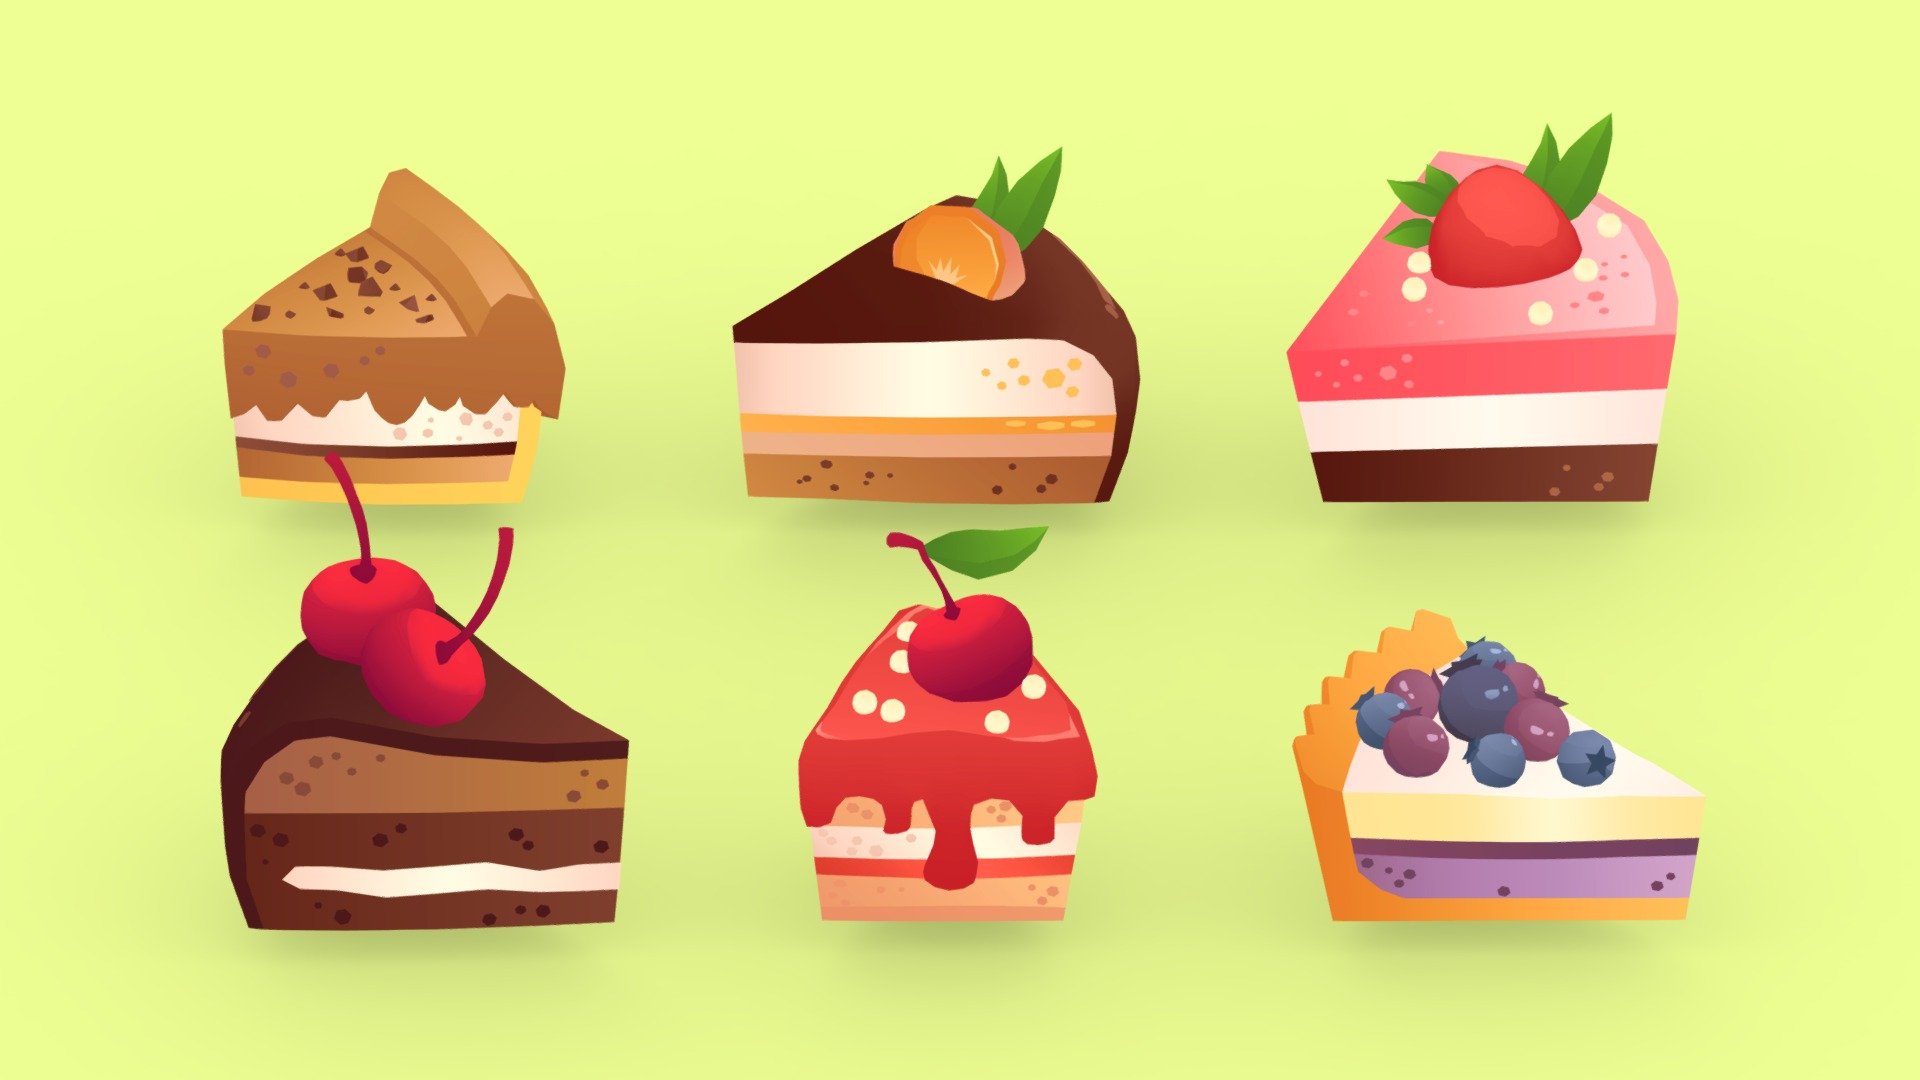 cute cakes and pies pack.

Textured with gradient atlas, so it is performant for mobile games and video games.

Like a few of my other assets in the same style, it uses a single texture diffuse map and is mapped using only color gradients. 
All gradient textures can be extended and combined to a large atlas.

There are more assets in this style to add to your game scene or environment. Check out my sale.

If you want to change the colors of the assets, you just need to move the UVs on the atlas to a different gradient.
Or contact me for changes, for a small fee.

**I also accept freelance jobs. Do not hesitate to write me. **

*-------------Terms of Use--------------

Commercial use of the assets  provided is permitted but cannot be included in an asset pack or sold at any sort of asset/resource marketplace.*

9213140

5207418 - Cartoon Cakes And Pies 002 - Buy Royalty Free 3D model by Stylized Box (@Stylized_Box) 3d model